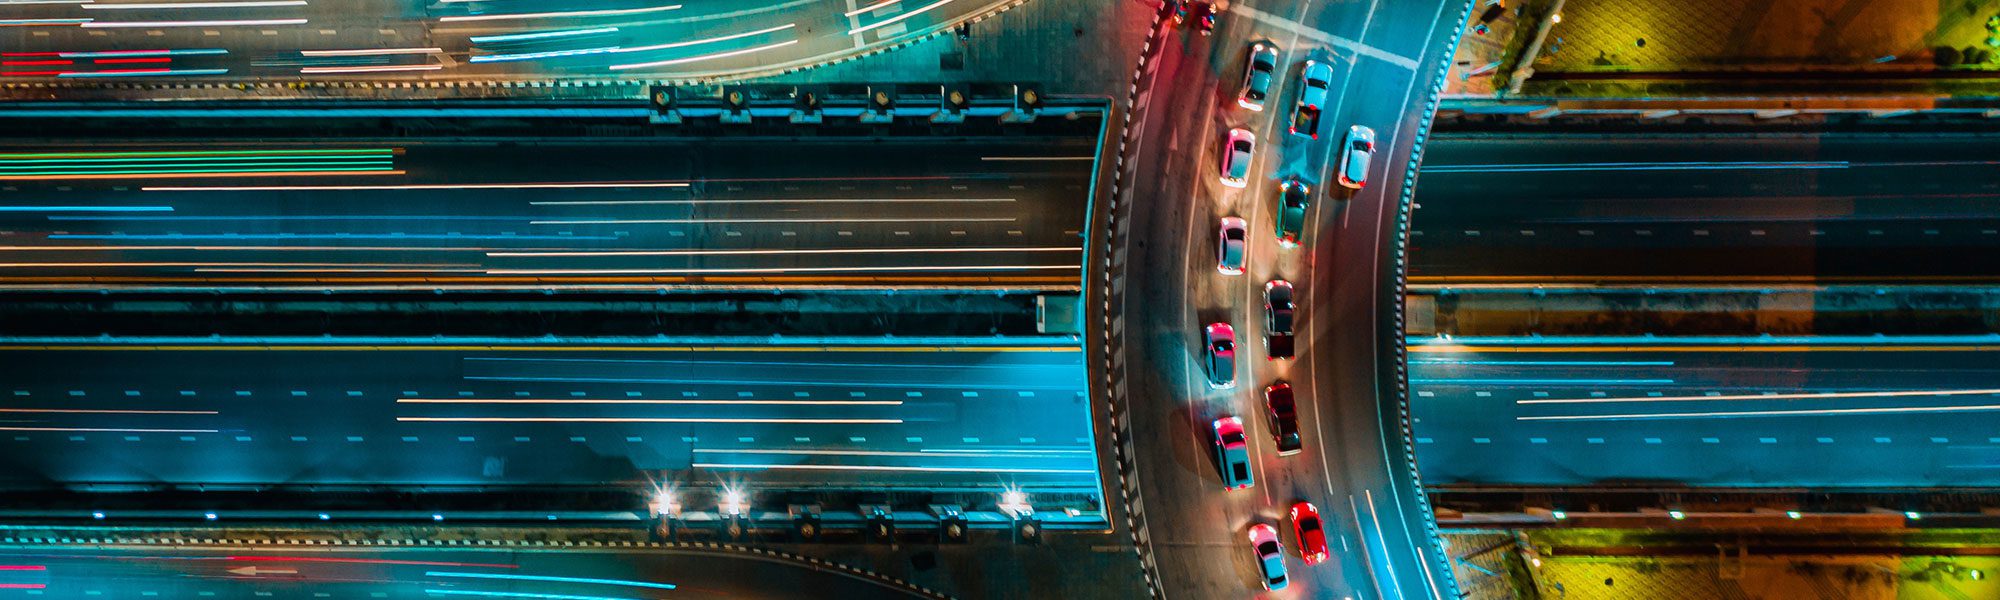 overhead view of colorful highway curve with cars at night